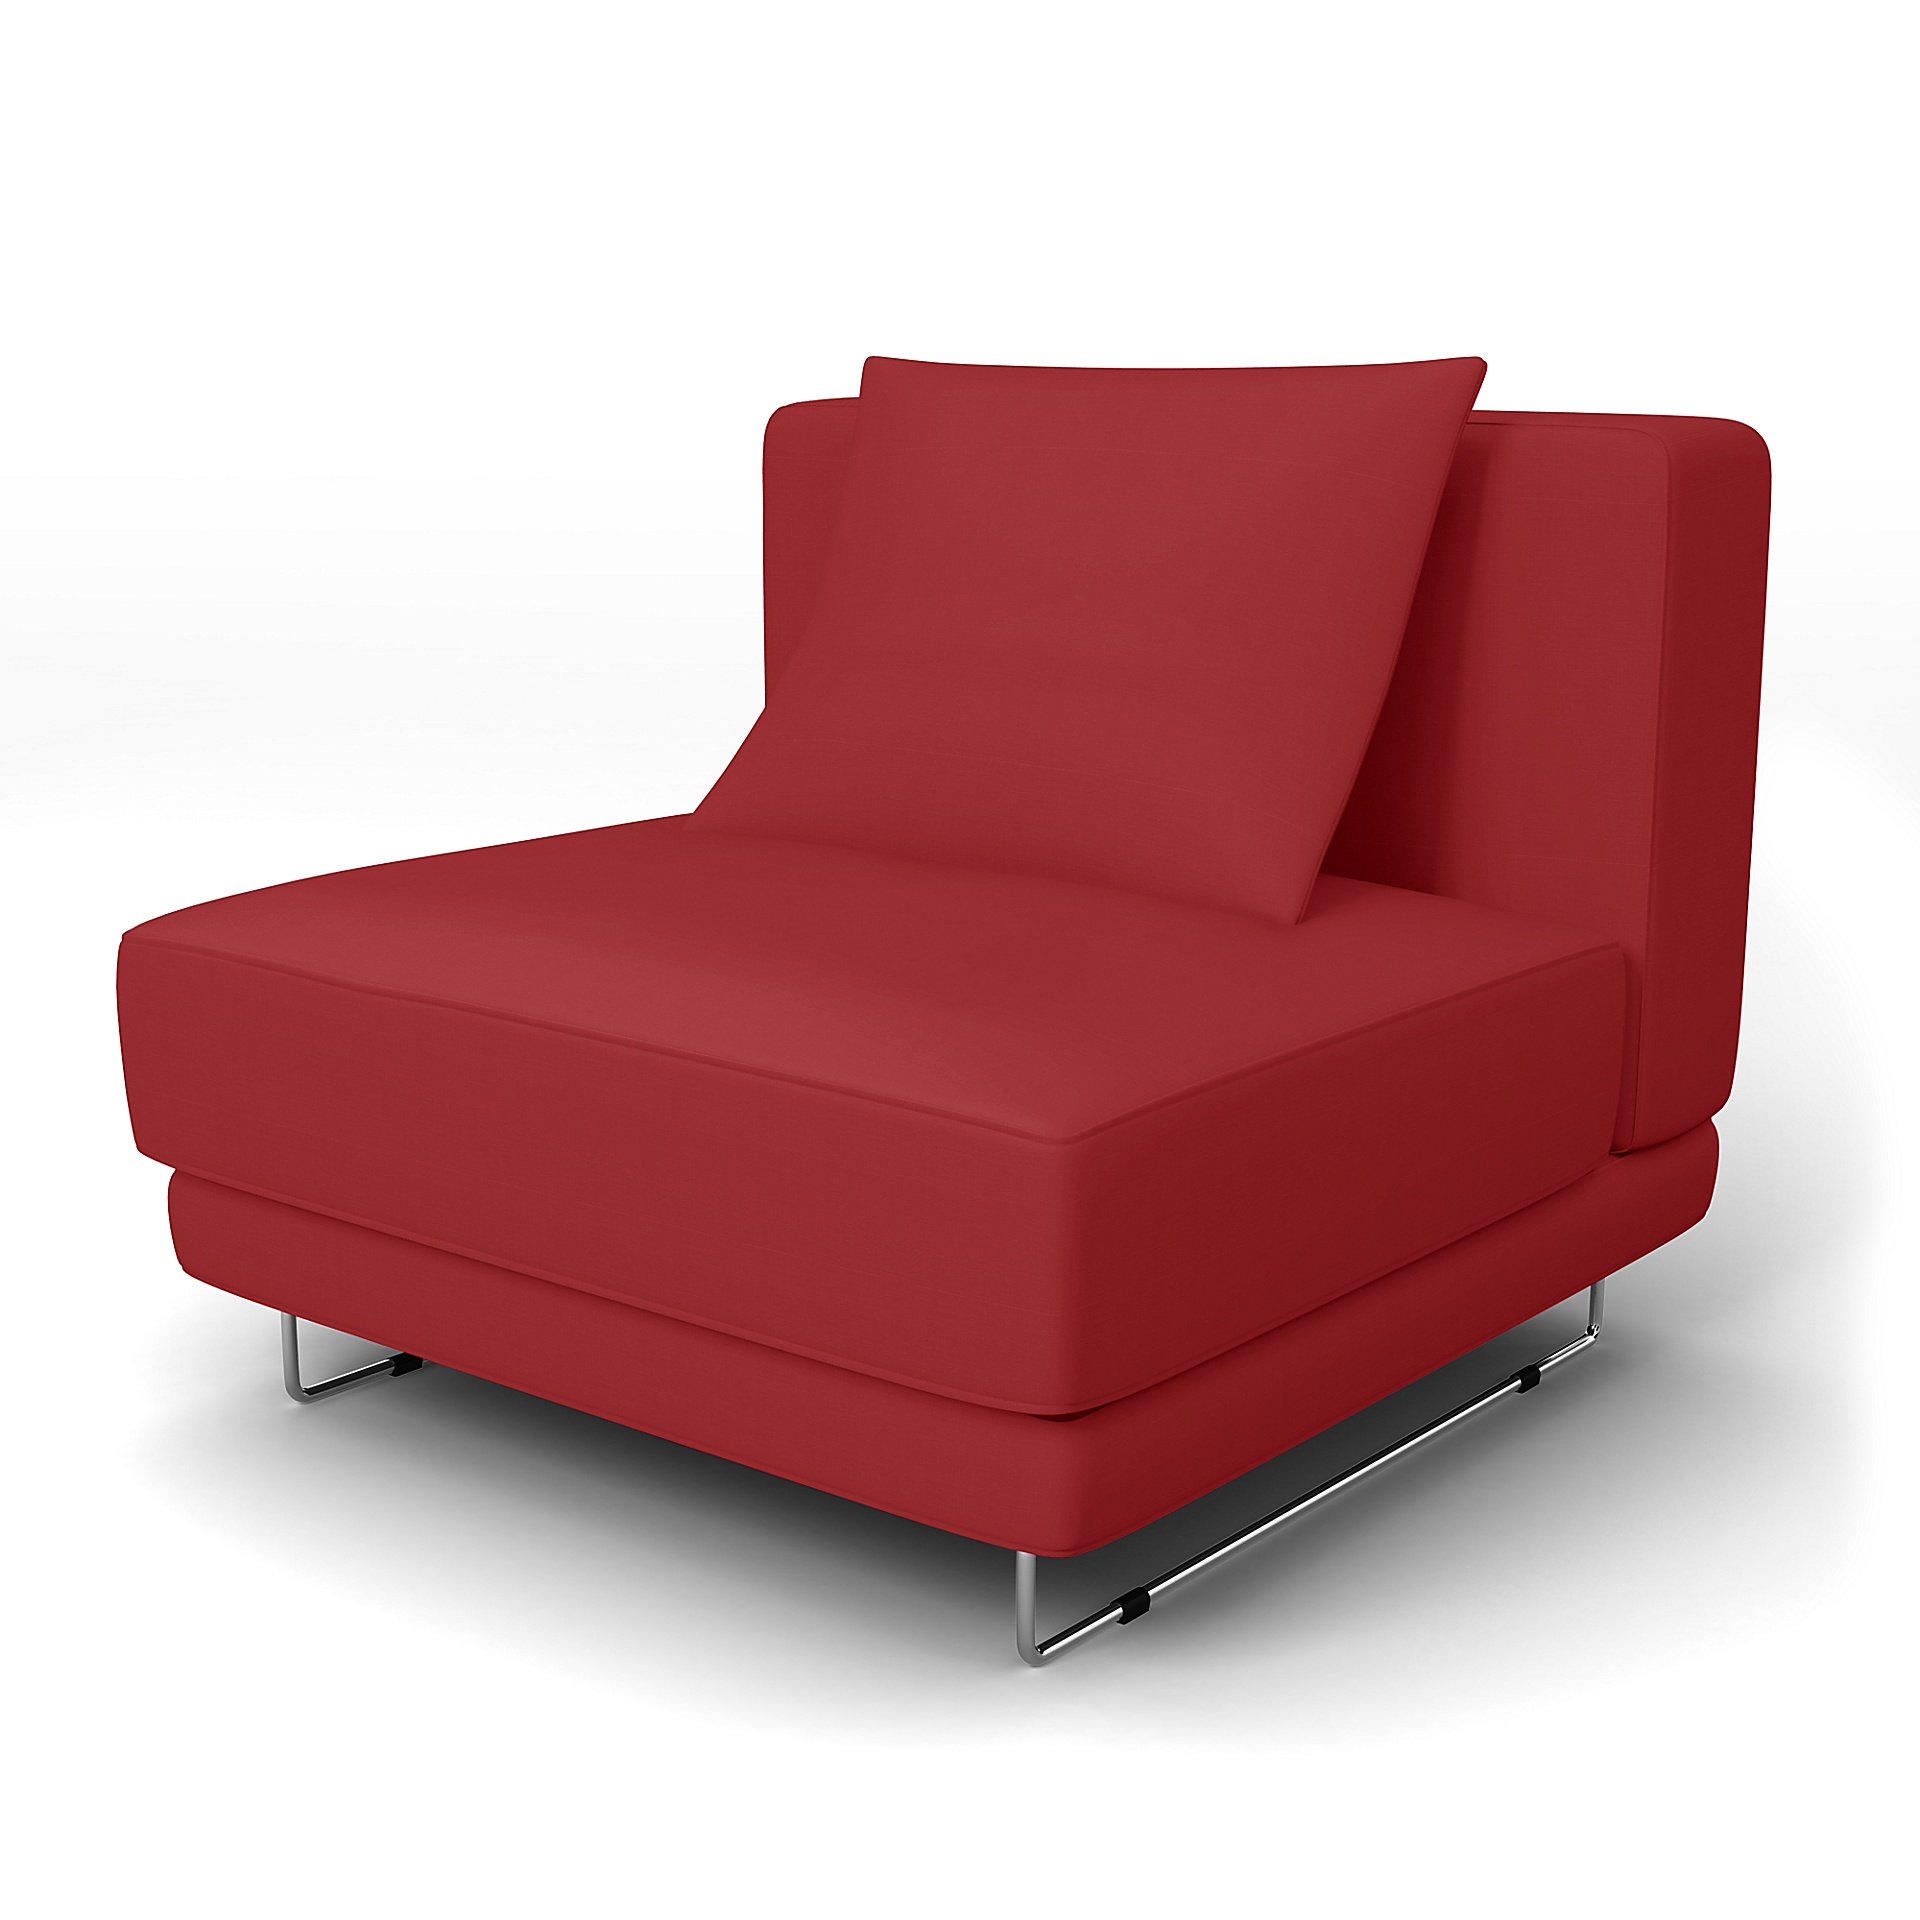 IKEA - Tylosand 1 Seat Module Cover, Scarlet Red, Cotton - Bemz